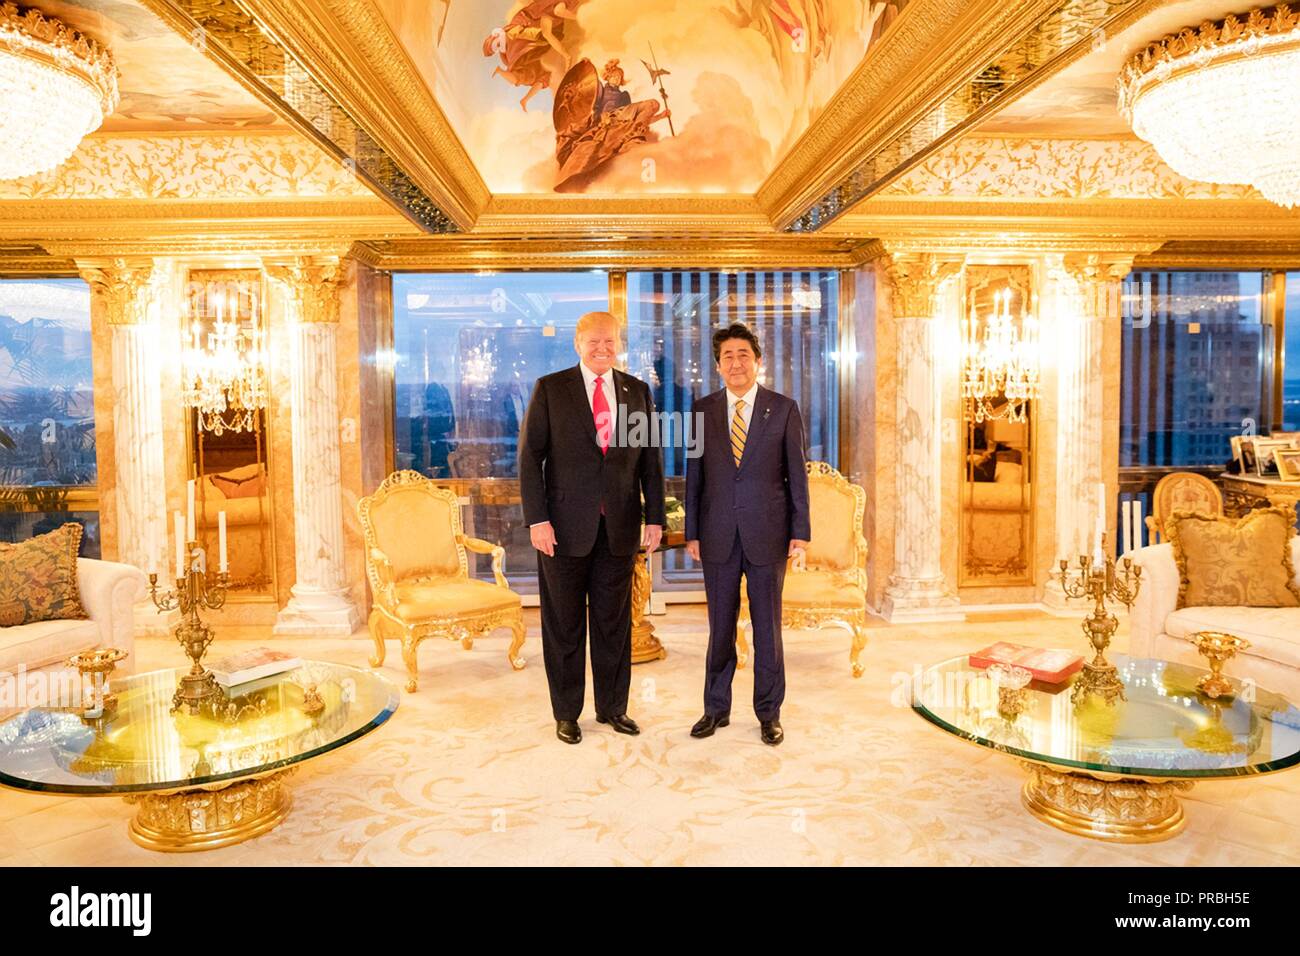 ¿Cuánto mide Shinzo Abe? - Altura - Real height Us-president-donald-trump-poses-with-japanese-prime-minister-shinzo-abe-during-a-working-dinner-at-trumps-personal-residence-in-at-trump-tower-september-23-2018-in-new-york-new-york-PRBH5E